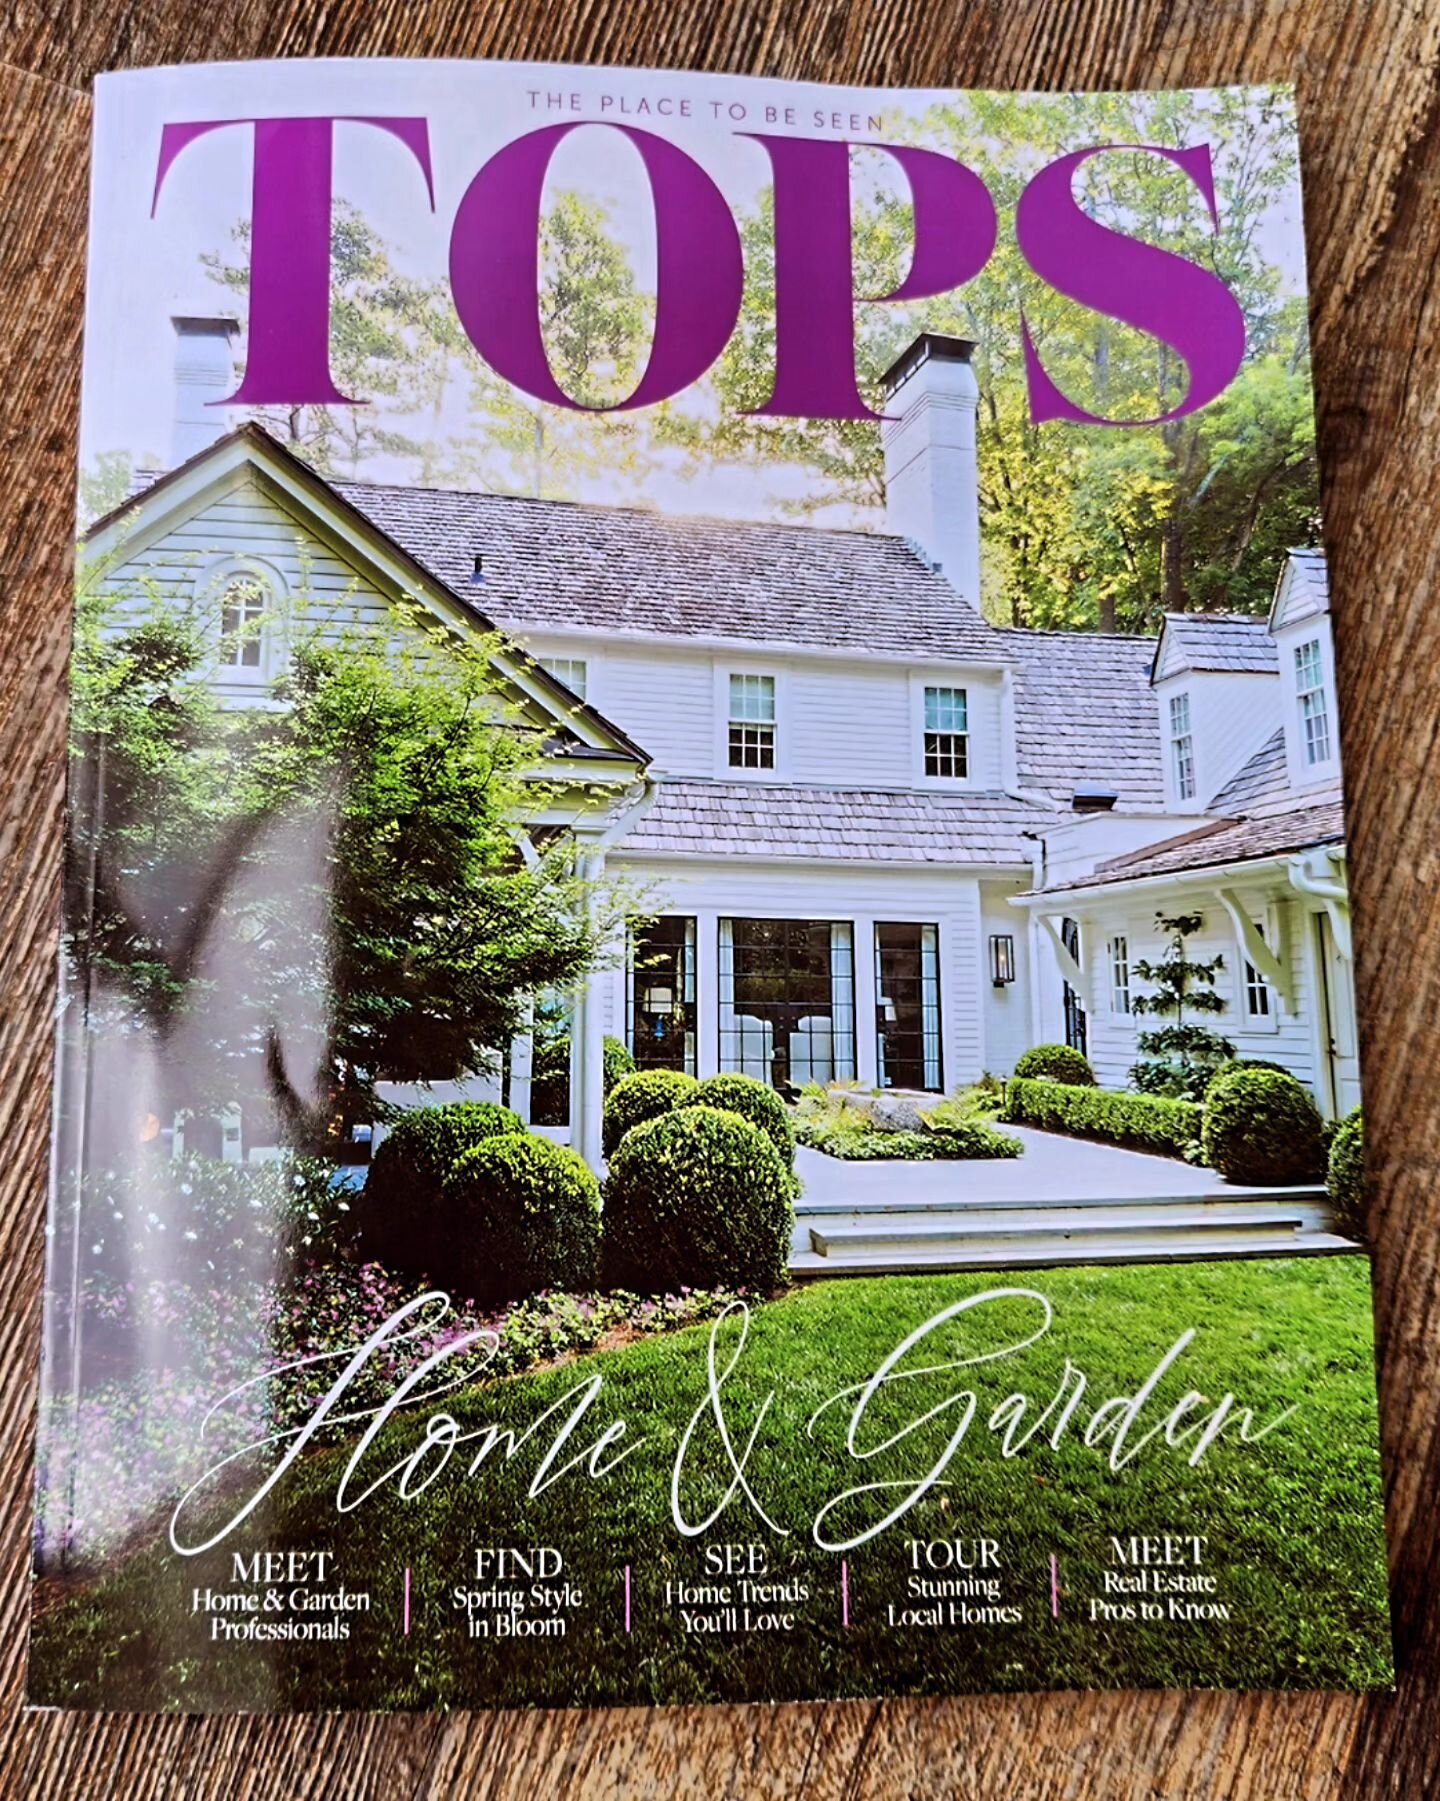 Pick up your copy of Tops magazine today!
We have been featured in the April 2024 issue. Include us in your Spring and Summer plans! 
All first responders receive an exclusive discount! *
👩🏻&zwj;⚕️👩&zwj;🚒👮&zwj;♂️🚑🚒🚓
*For discounts and special